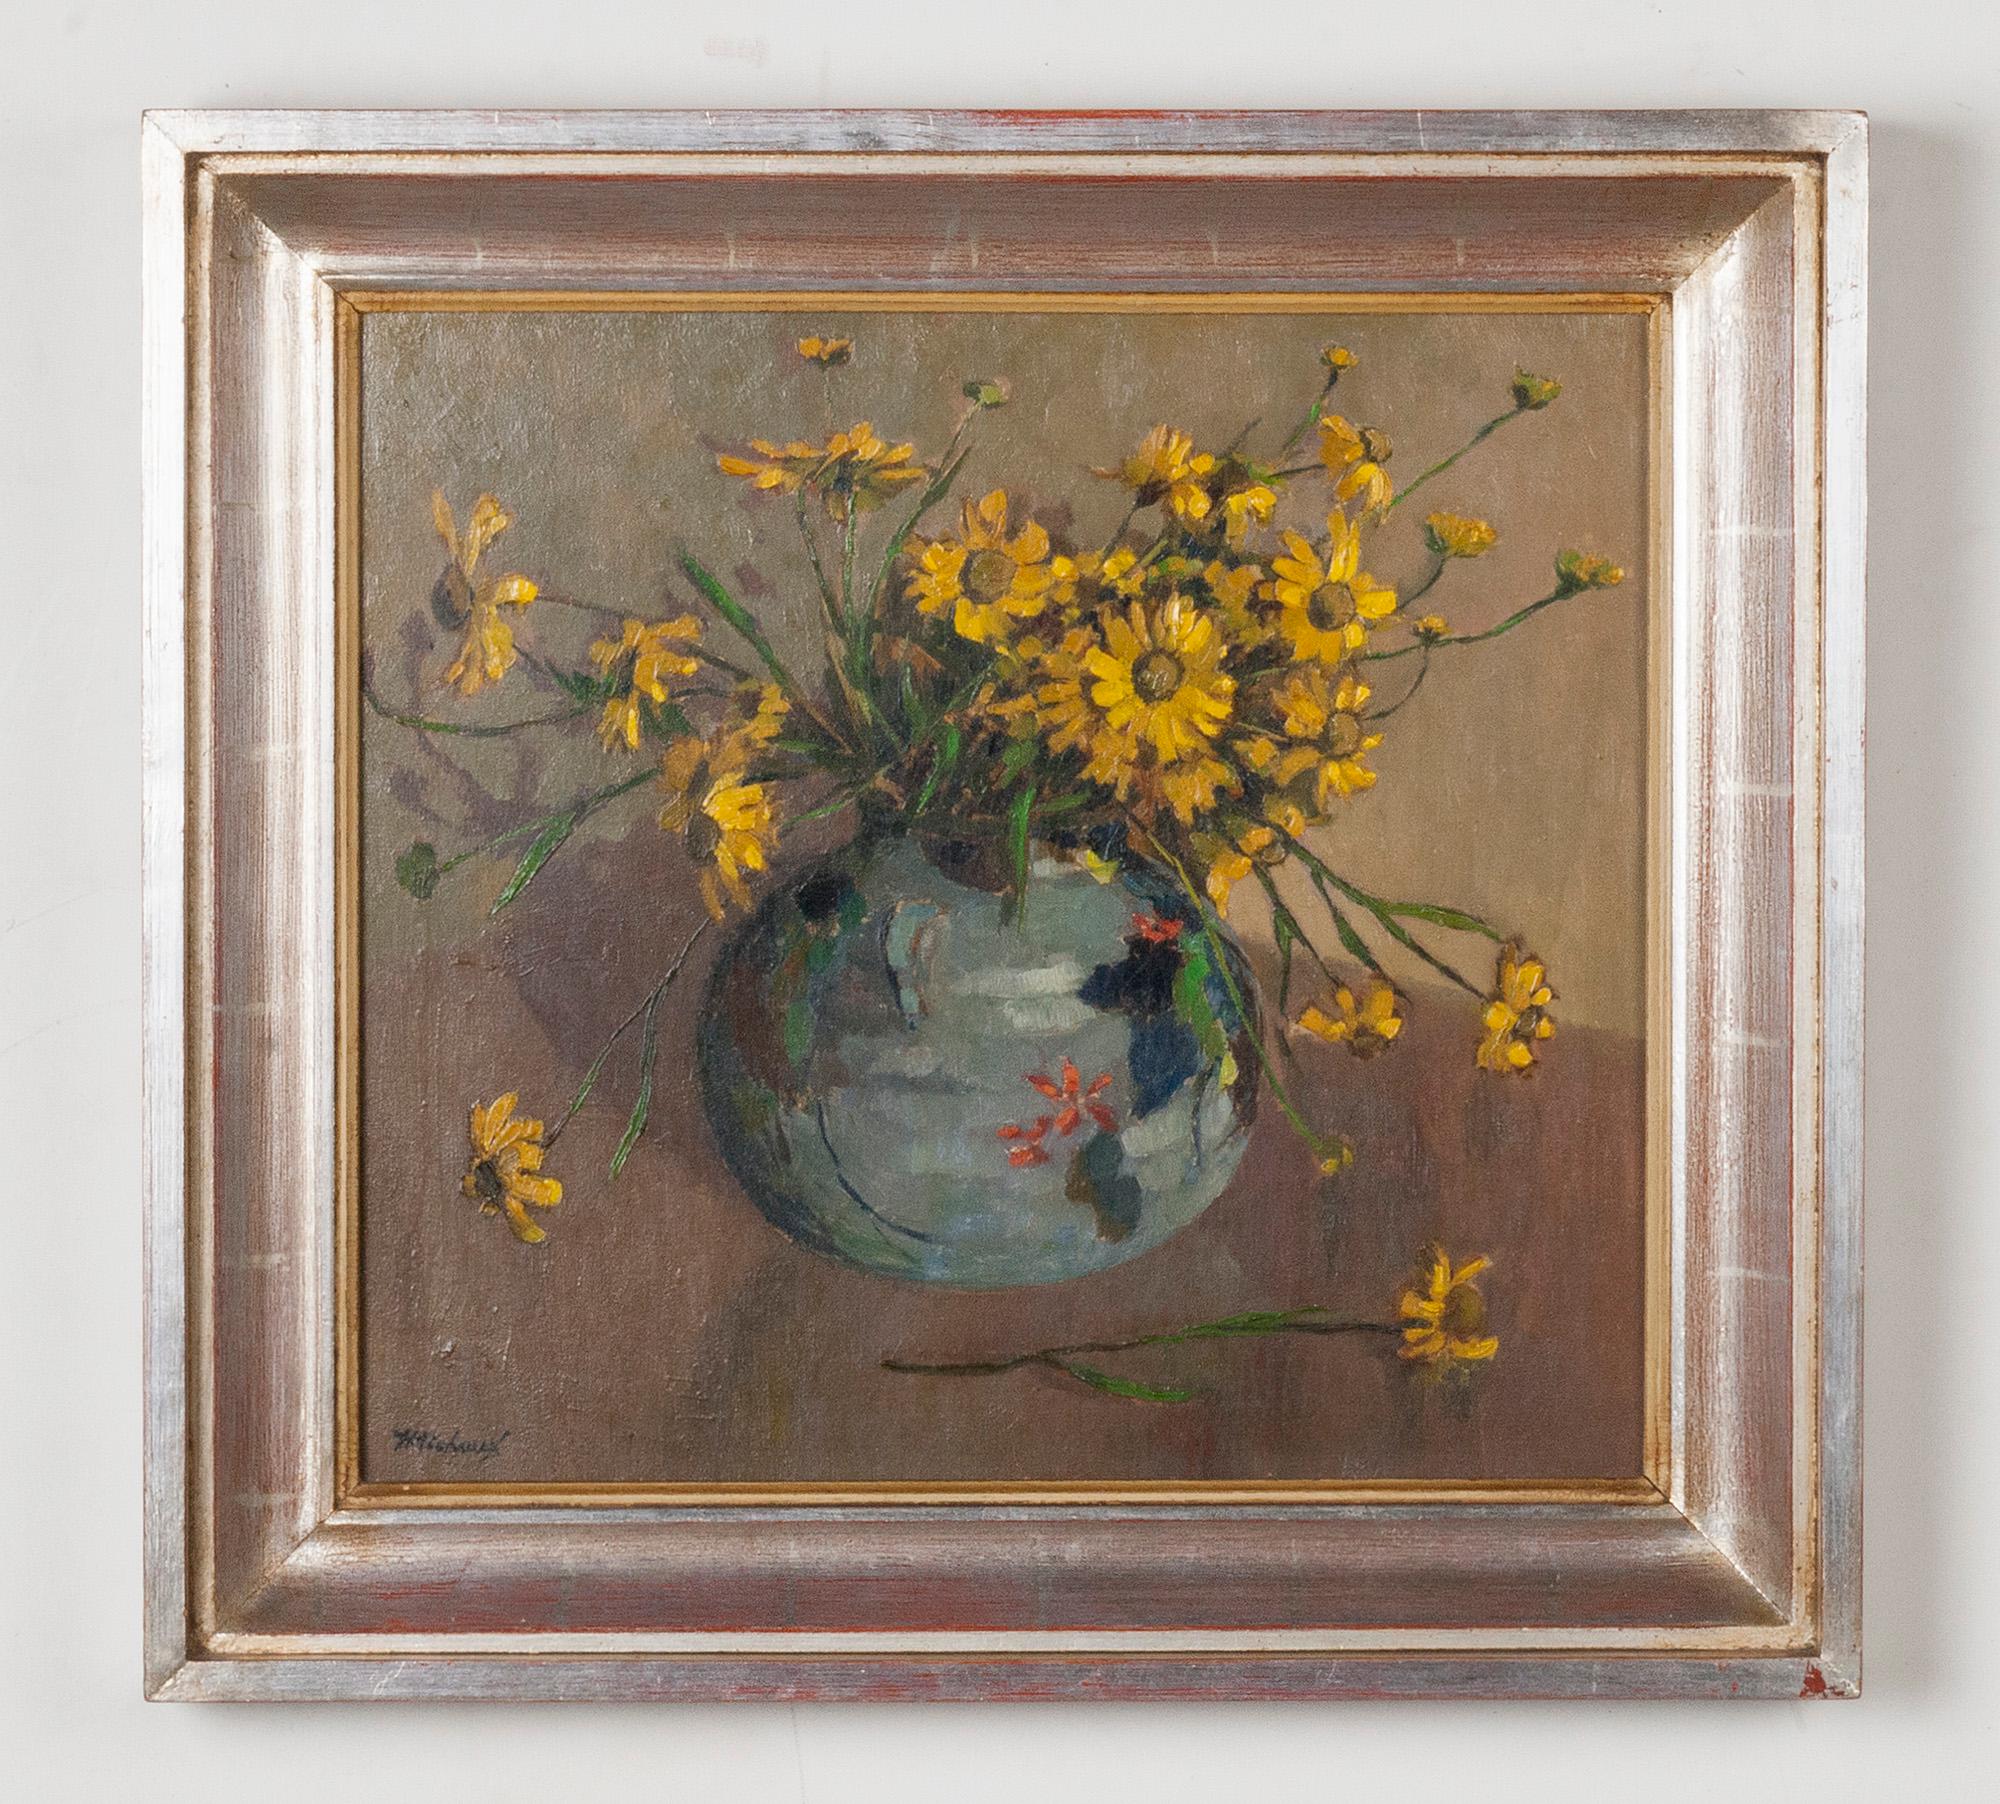 Flower still life, yellow wild flowers in an earthenware blue vase. It is a realistic painting; it is not a stylized bunch of flowers in a vase, but an everyday bouquet.
This painting was painted by Henri Michaux. Probably in his early years, maybe